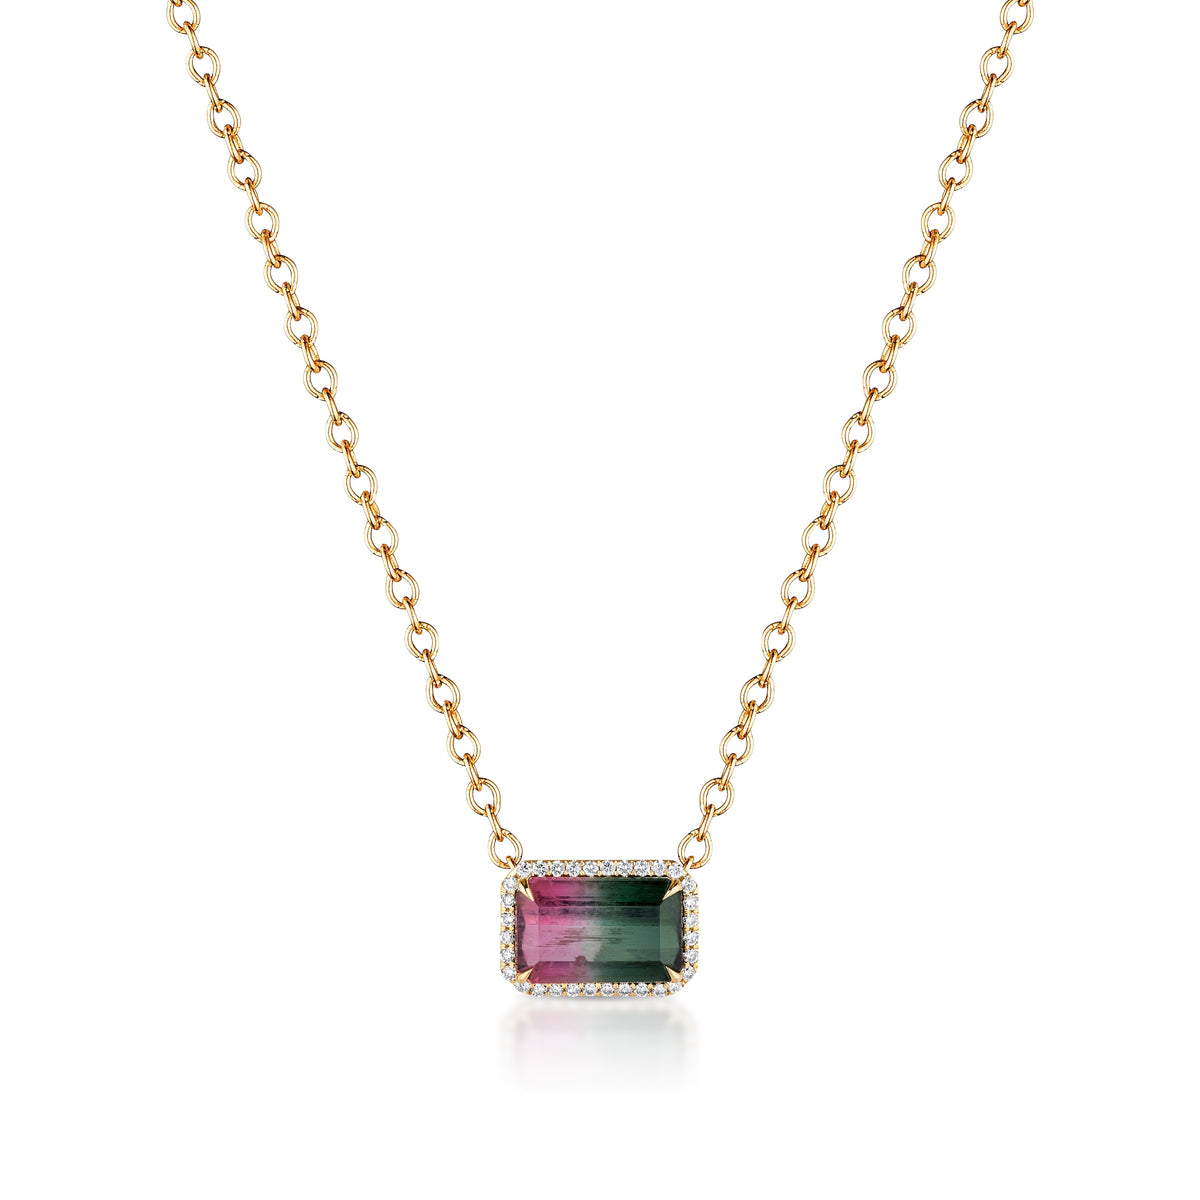 East-West Emerald Cut Watermelon Tourmaline with Pavé Pendant in Yellow Gold